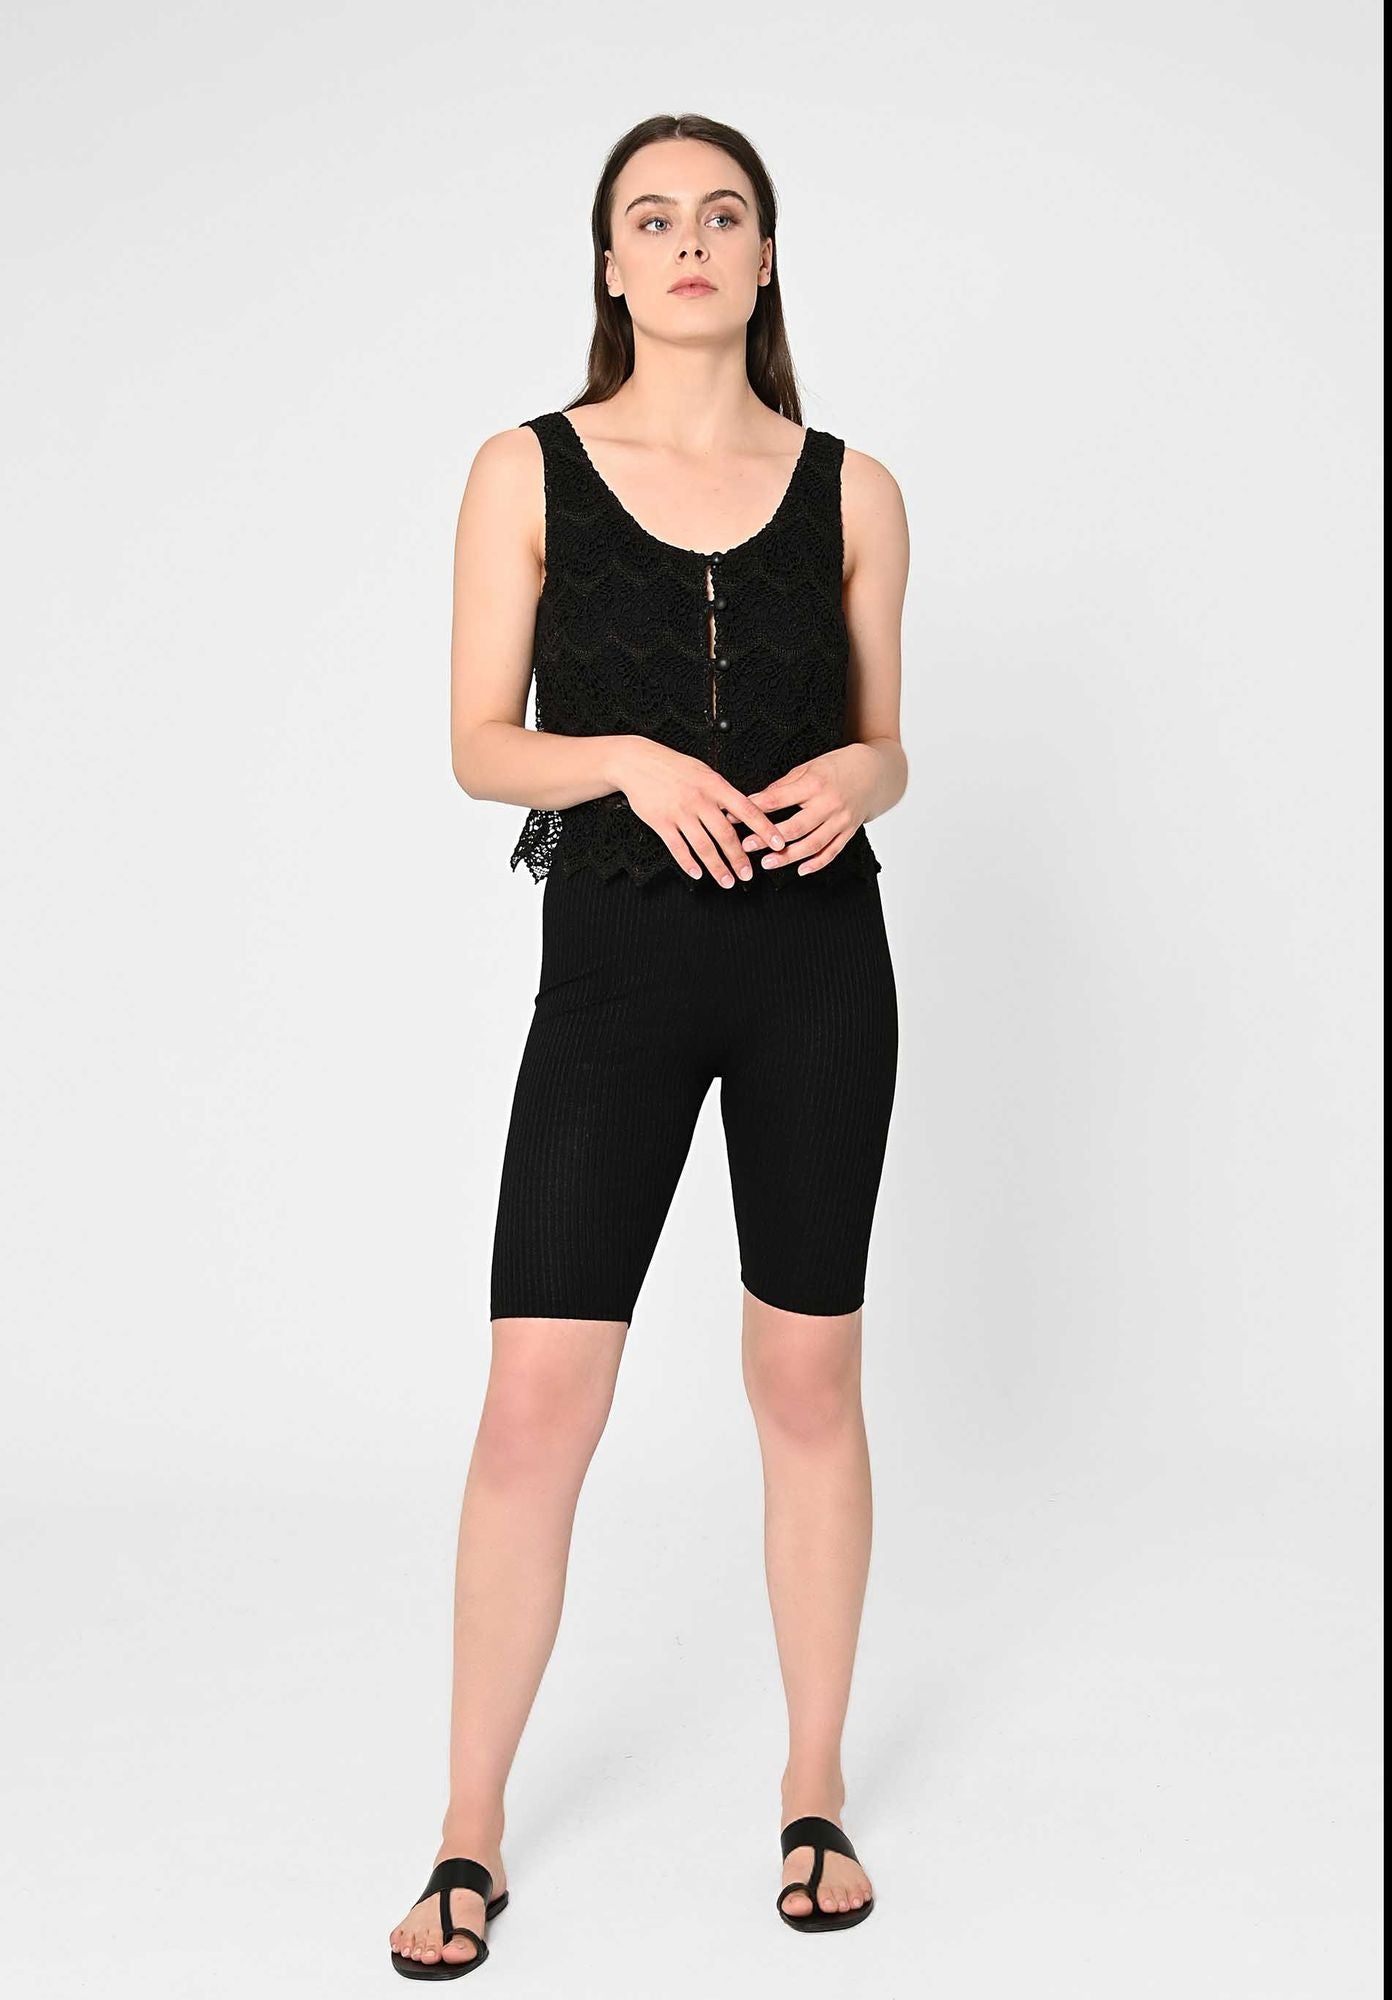 Cycling shorts AENIS in black from LOVJOI made of TENCEL™